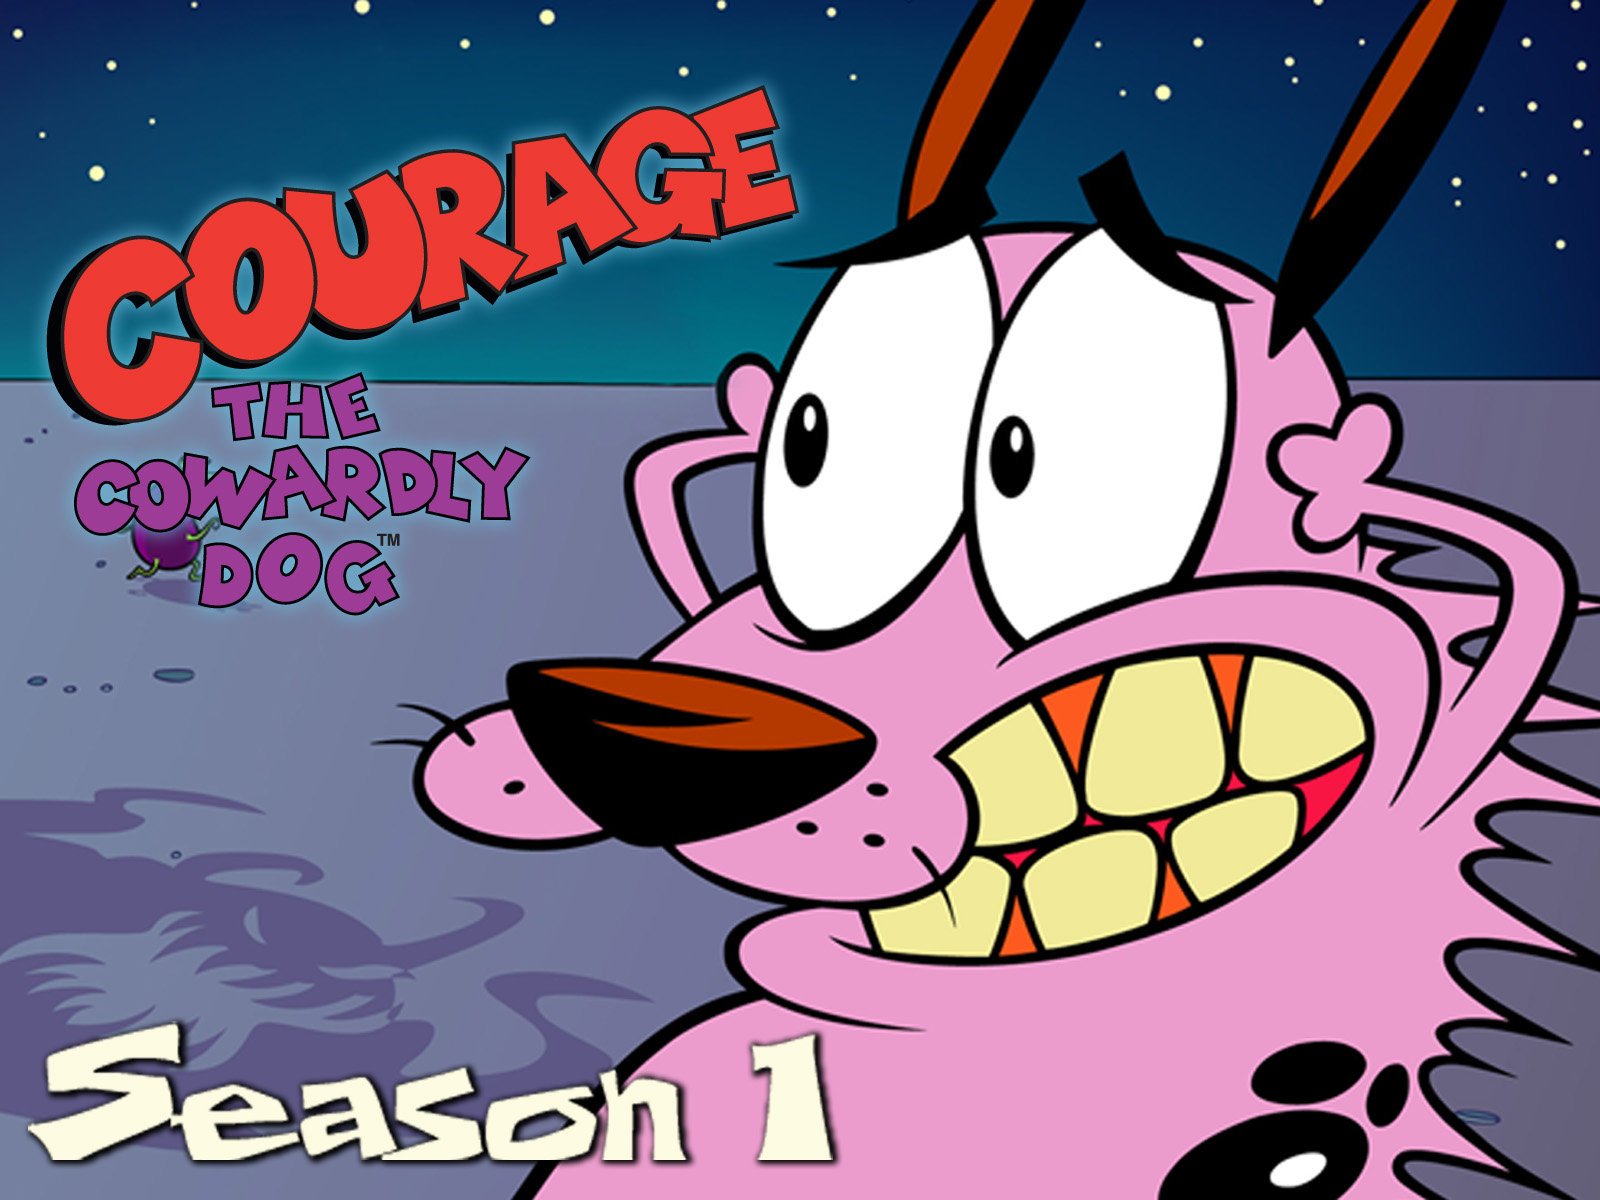 Where Can I Watch Episodes Of Courage The Cowardly Dog?